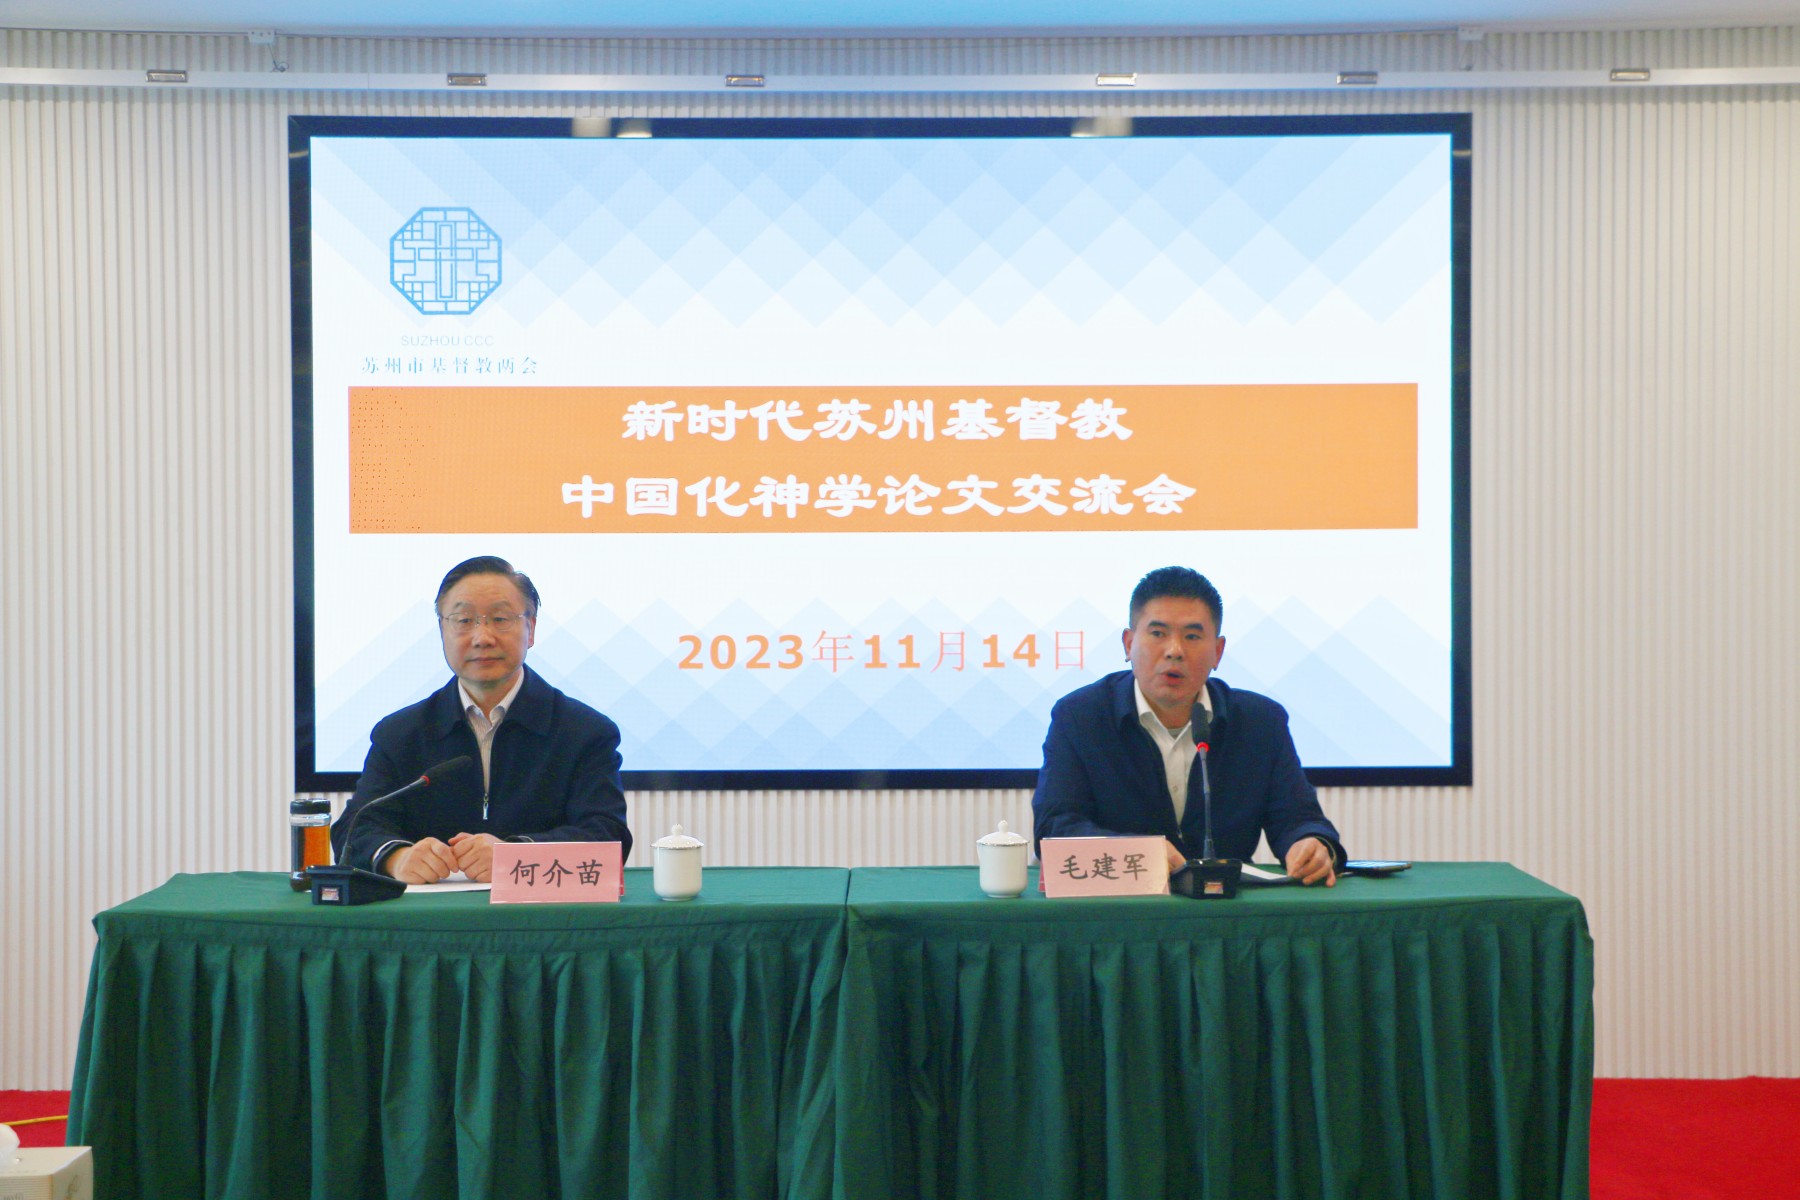 Suzhou Municipal CC&TSPM conducted an exchange of papers focusing on the localization of Christianity within Suzhou in this new era in Suzhou City, Jiangsu Province, on November 14, 2023.